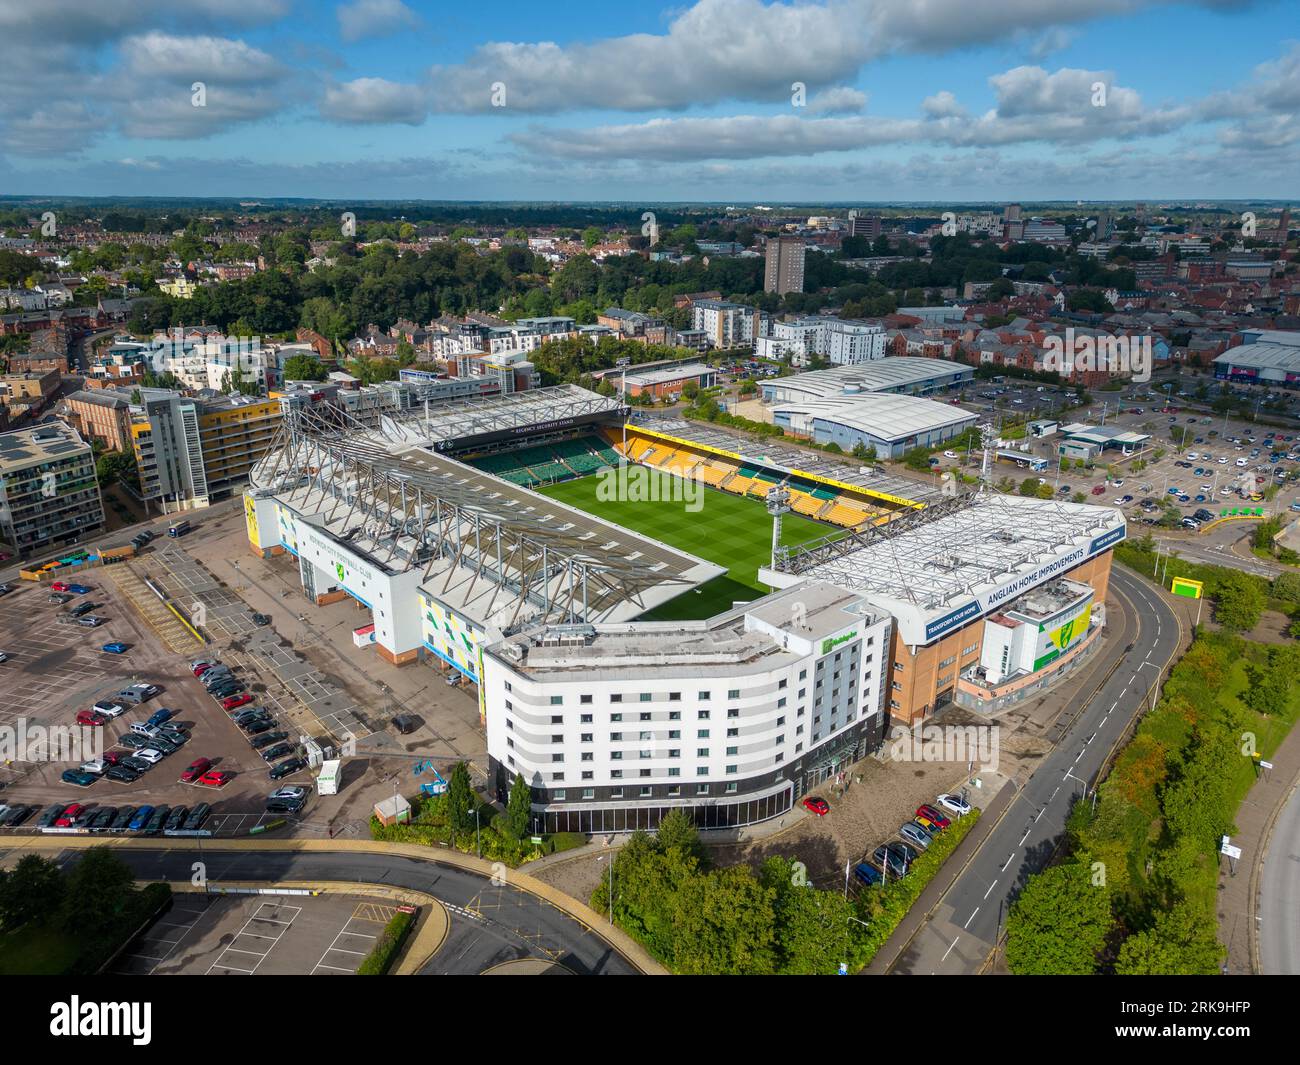 Norwich city football club ground in Norwich city centre. Aerial view of the Canaries home ground. Stock Photo